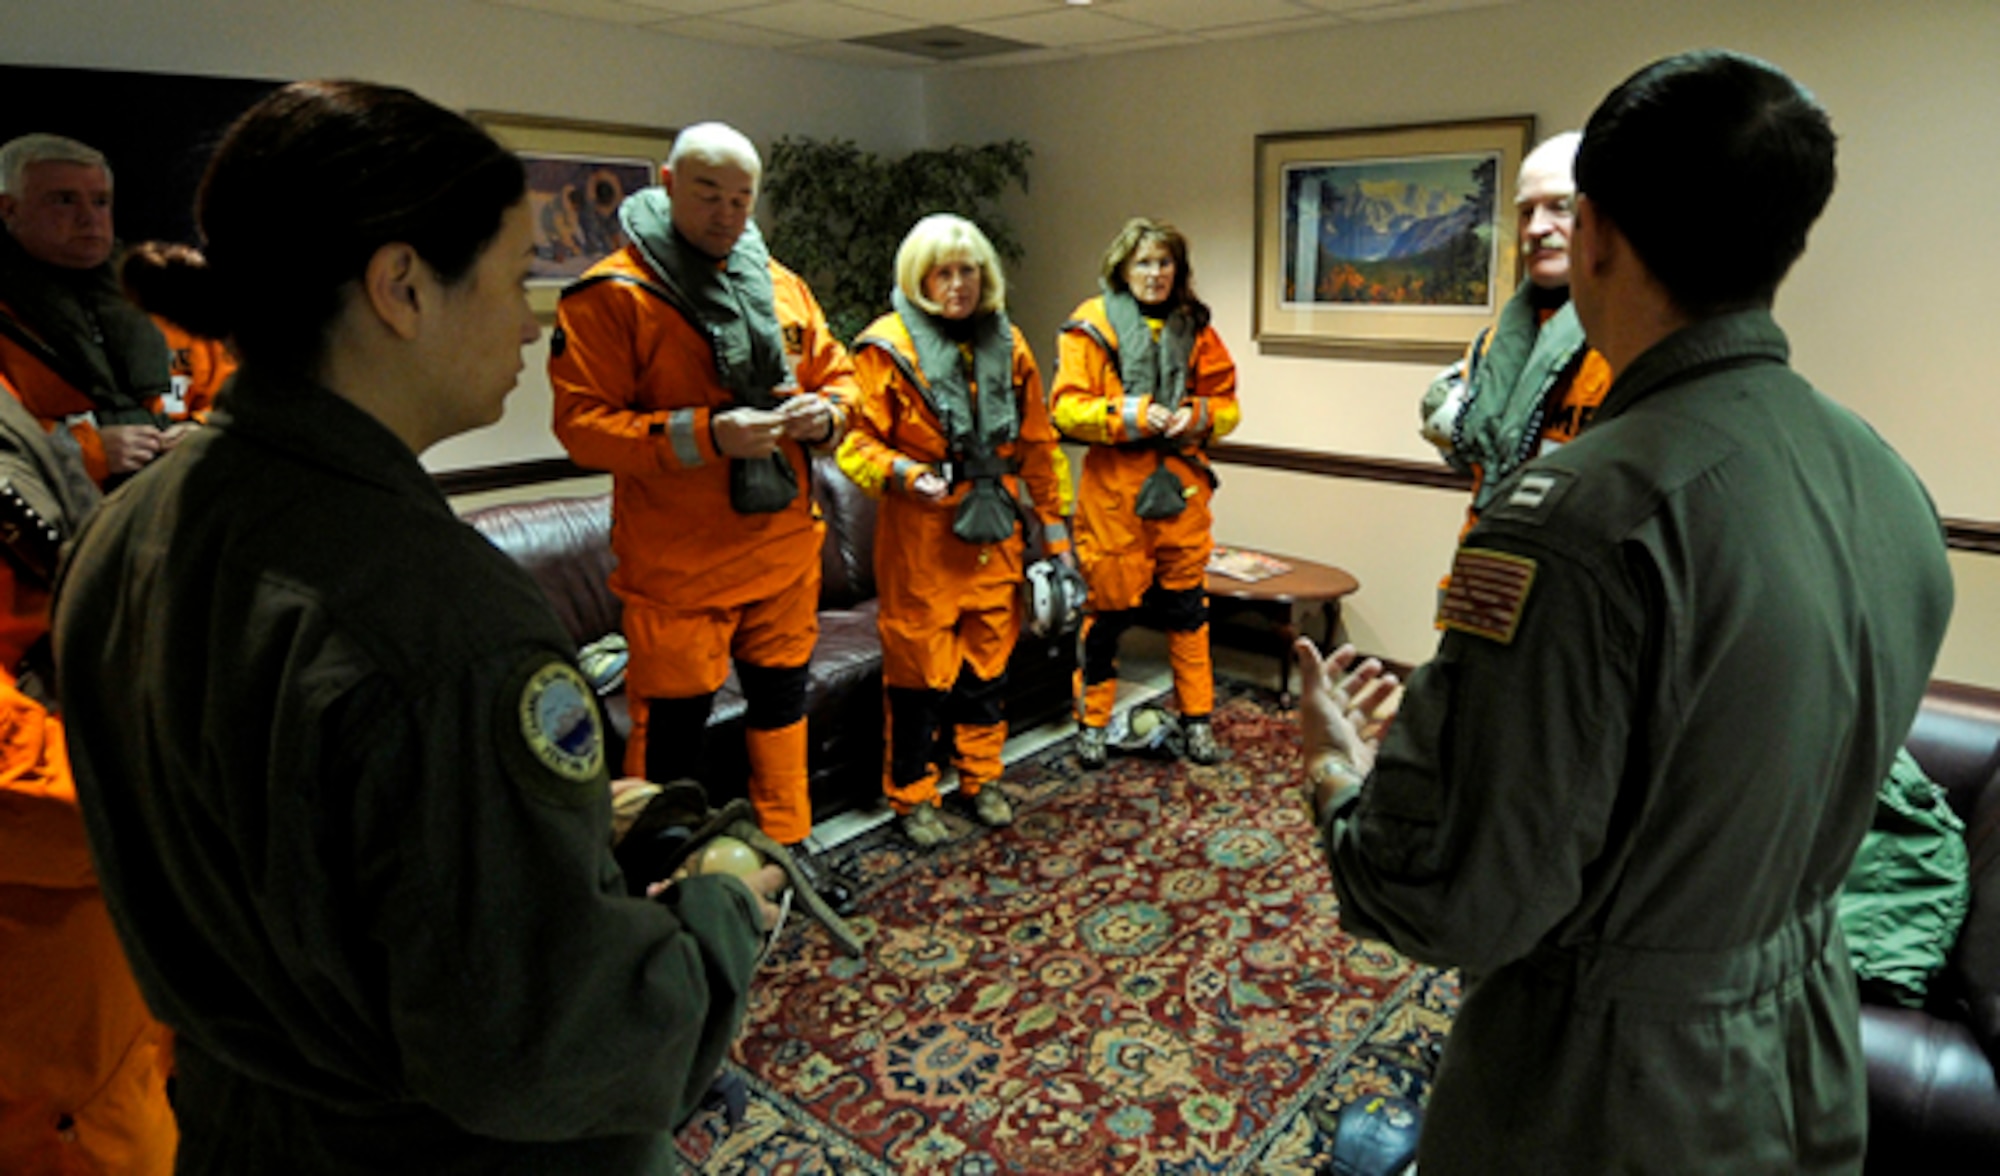 Navy personnel from a C-2A Greyhound logistics aircraft give Alaska Governor Sarah Palin and her husband Todd a safety briefing before getting on the aircraft that will be taking them out to USS John C. Stennis (CVN 74) during exercise Northern Edge 2009, Elmendorf AFB, Alaska, June 18, 2009.  Northern Edge 2009 is Alaska's largest military training exercise.  It prepares joint forces to respond to crises throughout the Asia-Pacific region.  (Released/U.S. Air Force photo by TSgt Dennis J. Henry Jr.)